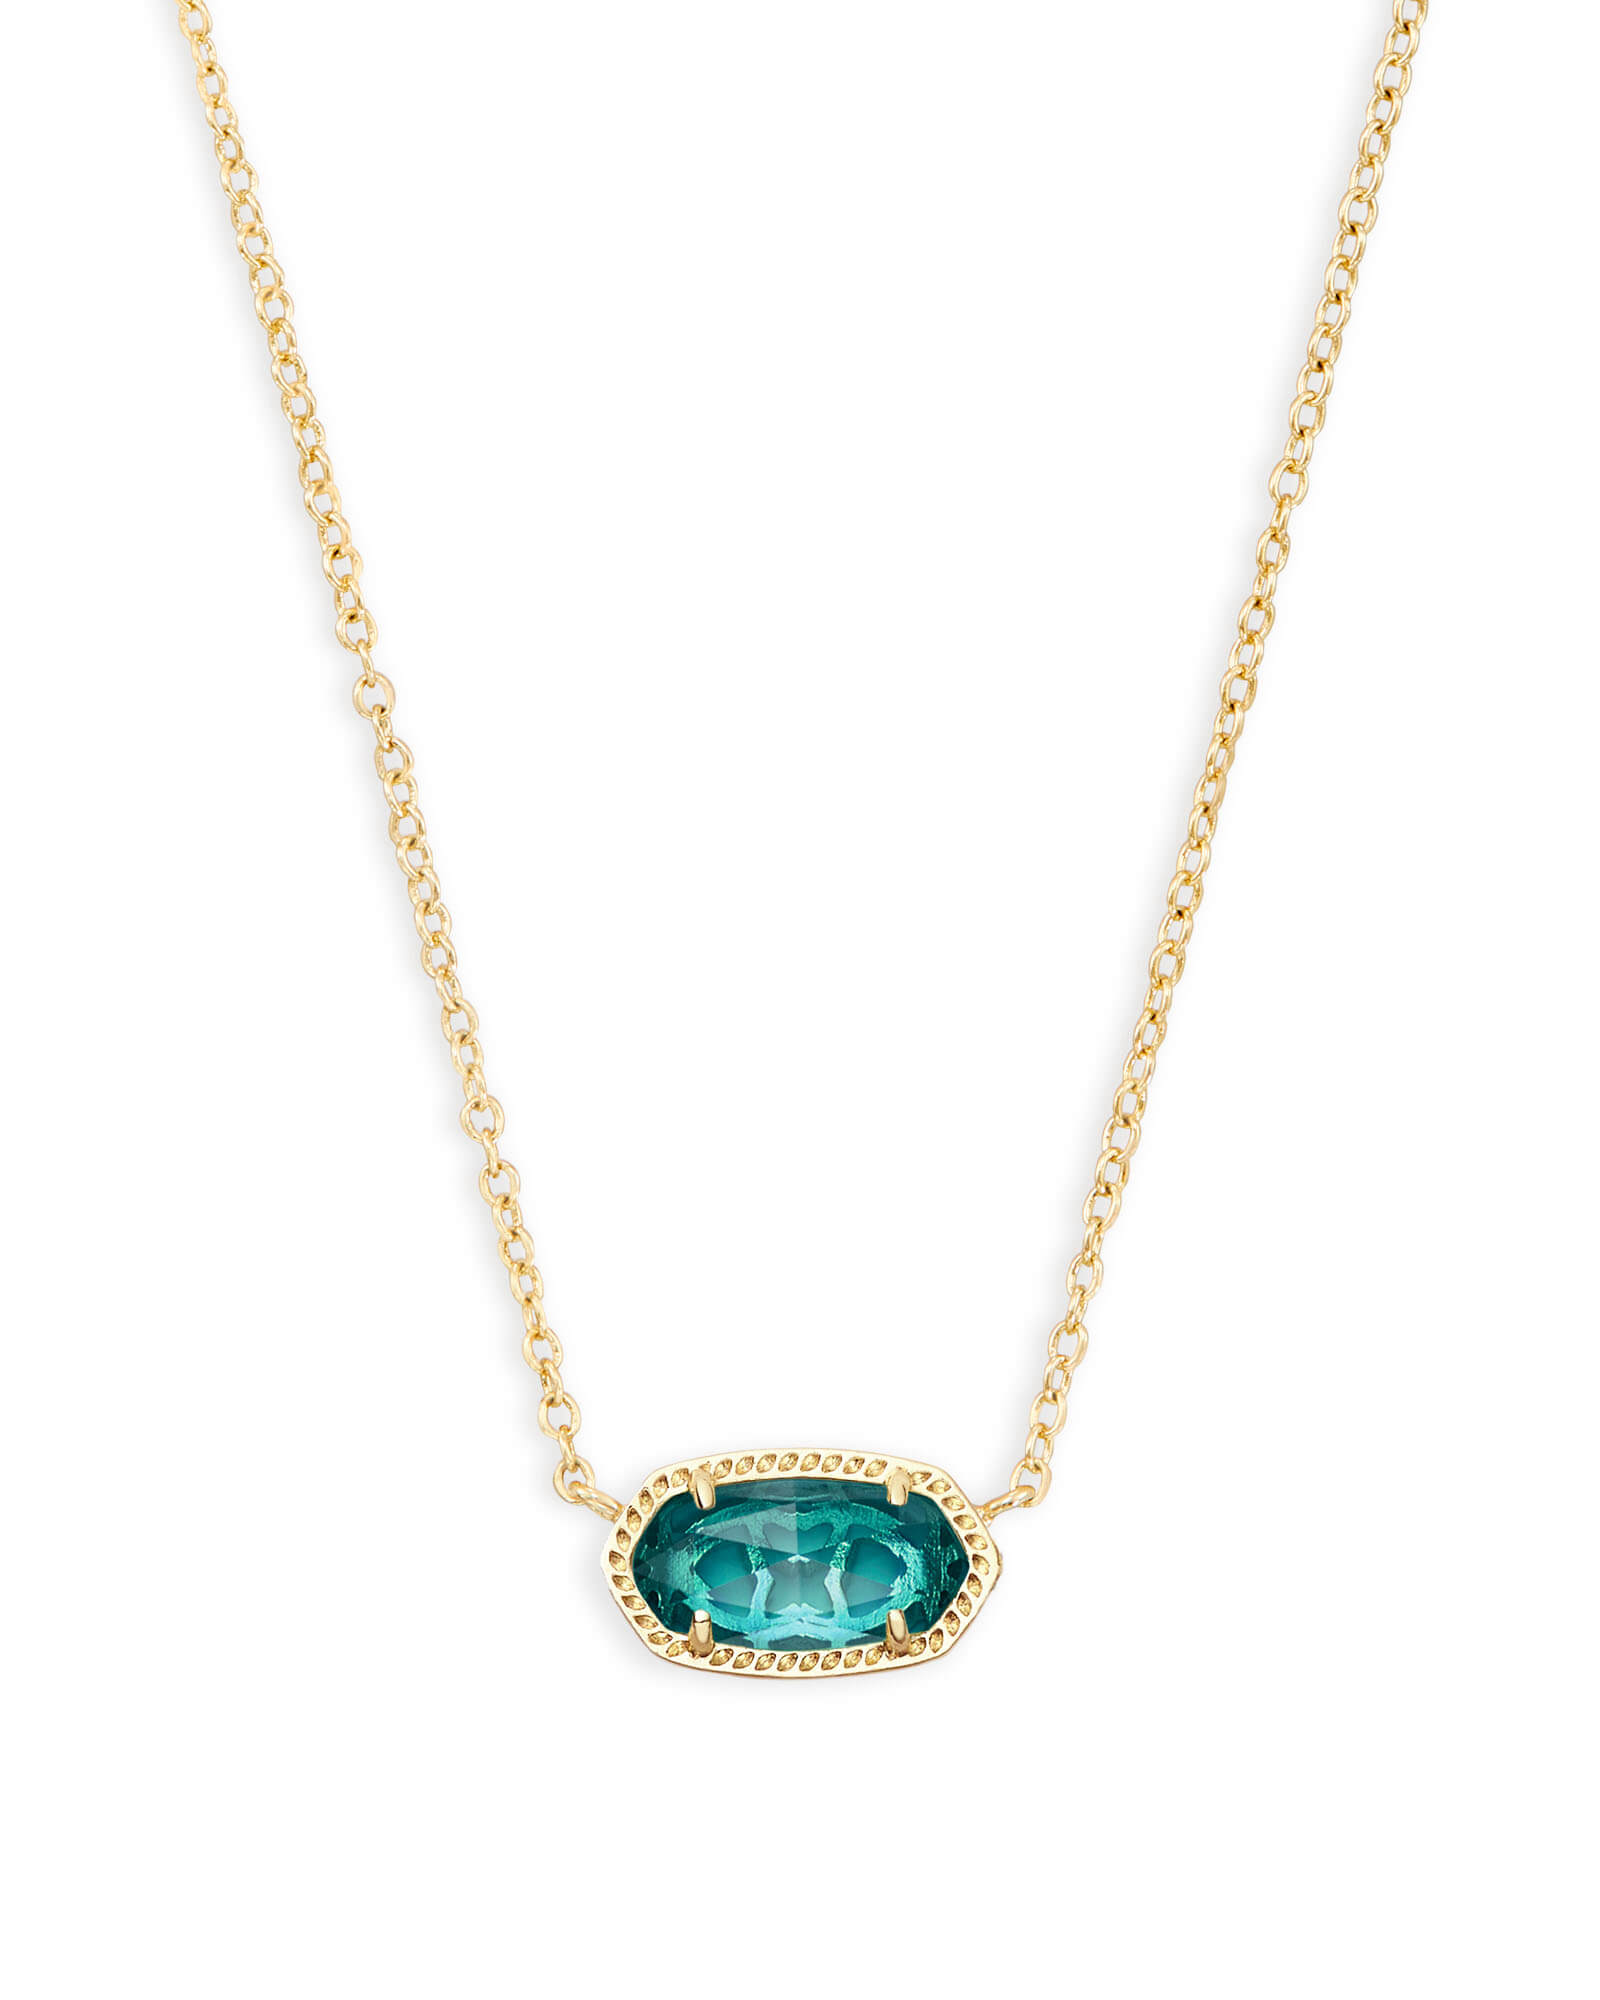 Are Kendra Scott Necklaces Waterproof (8 Important Questions) - Spare Water